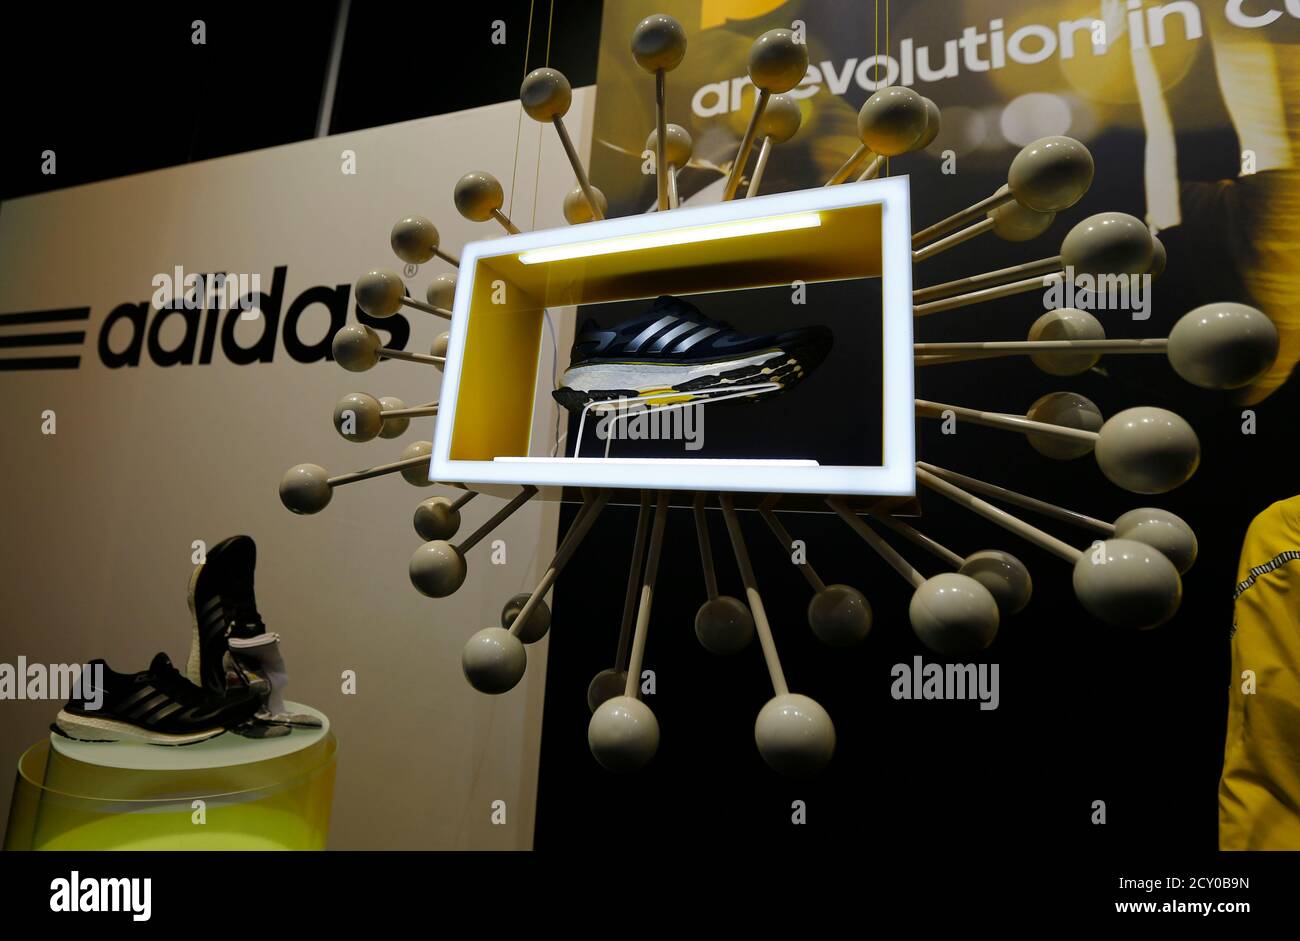 The new Adidas shoe 